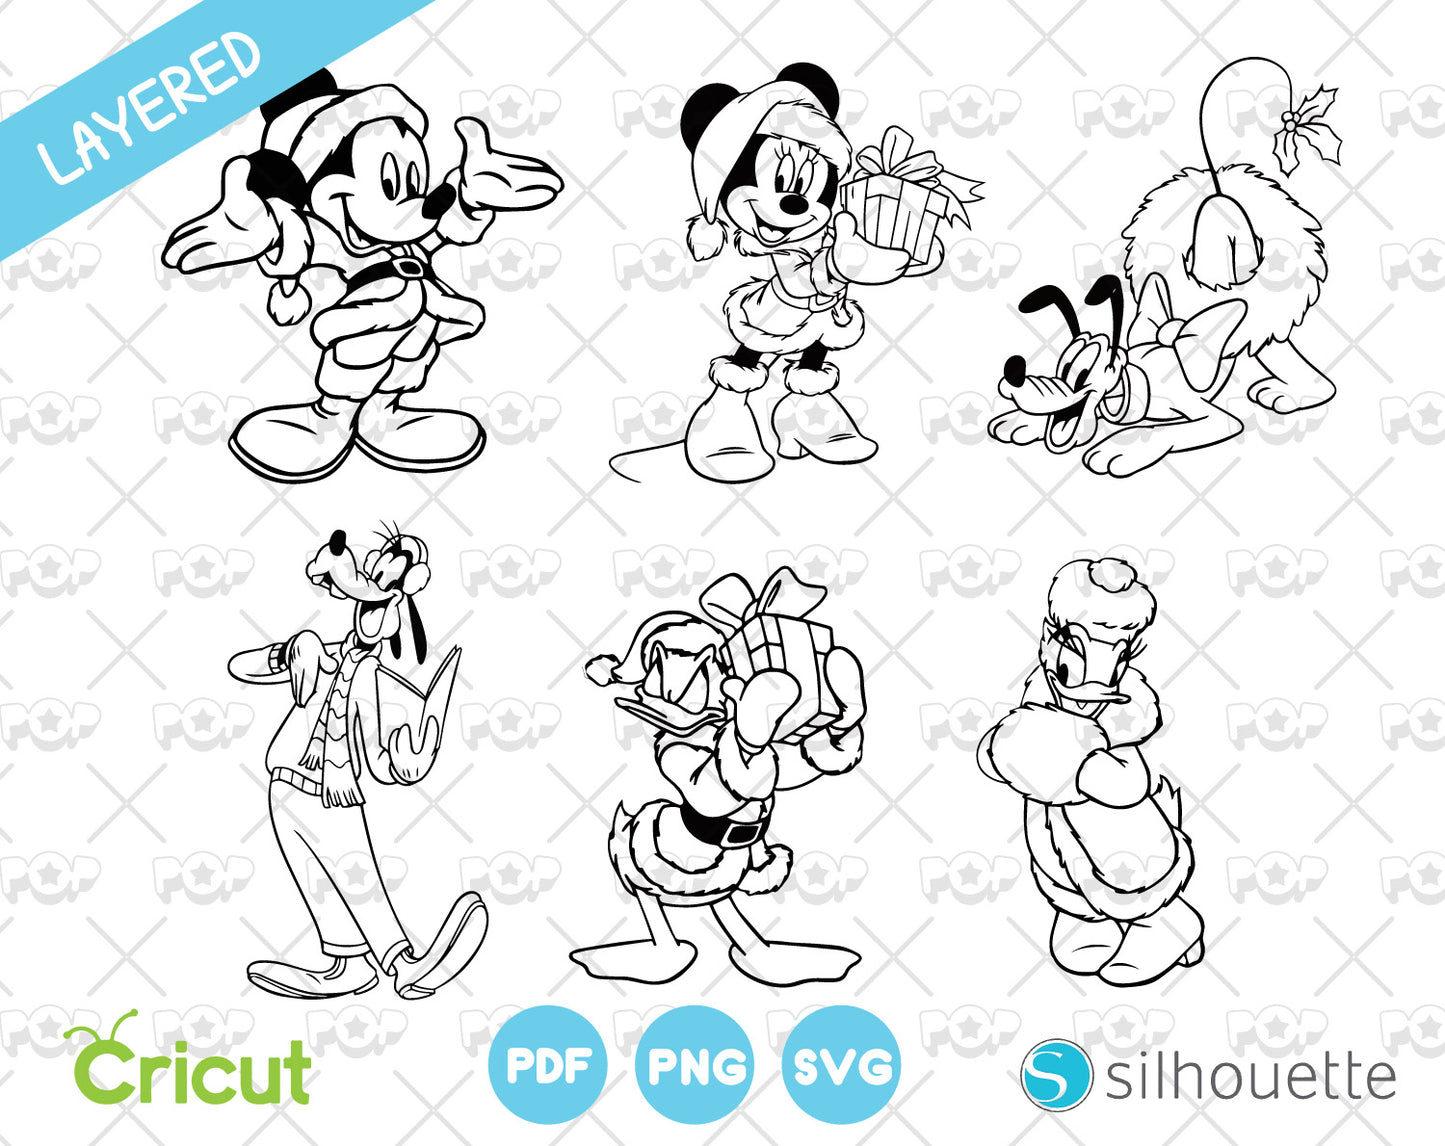 Disney Christmas clipart bundle, Mickey and Friends Christmas cliparts, SVG cut files for cricut silhouette, SVG, PNG, DXF, instant download